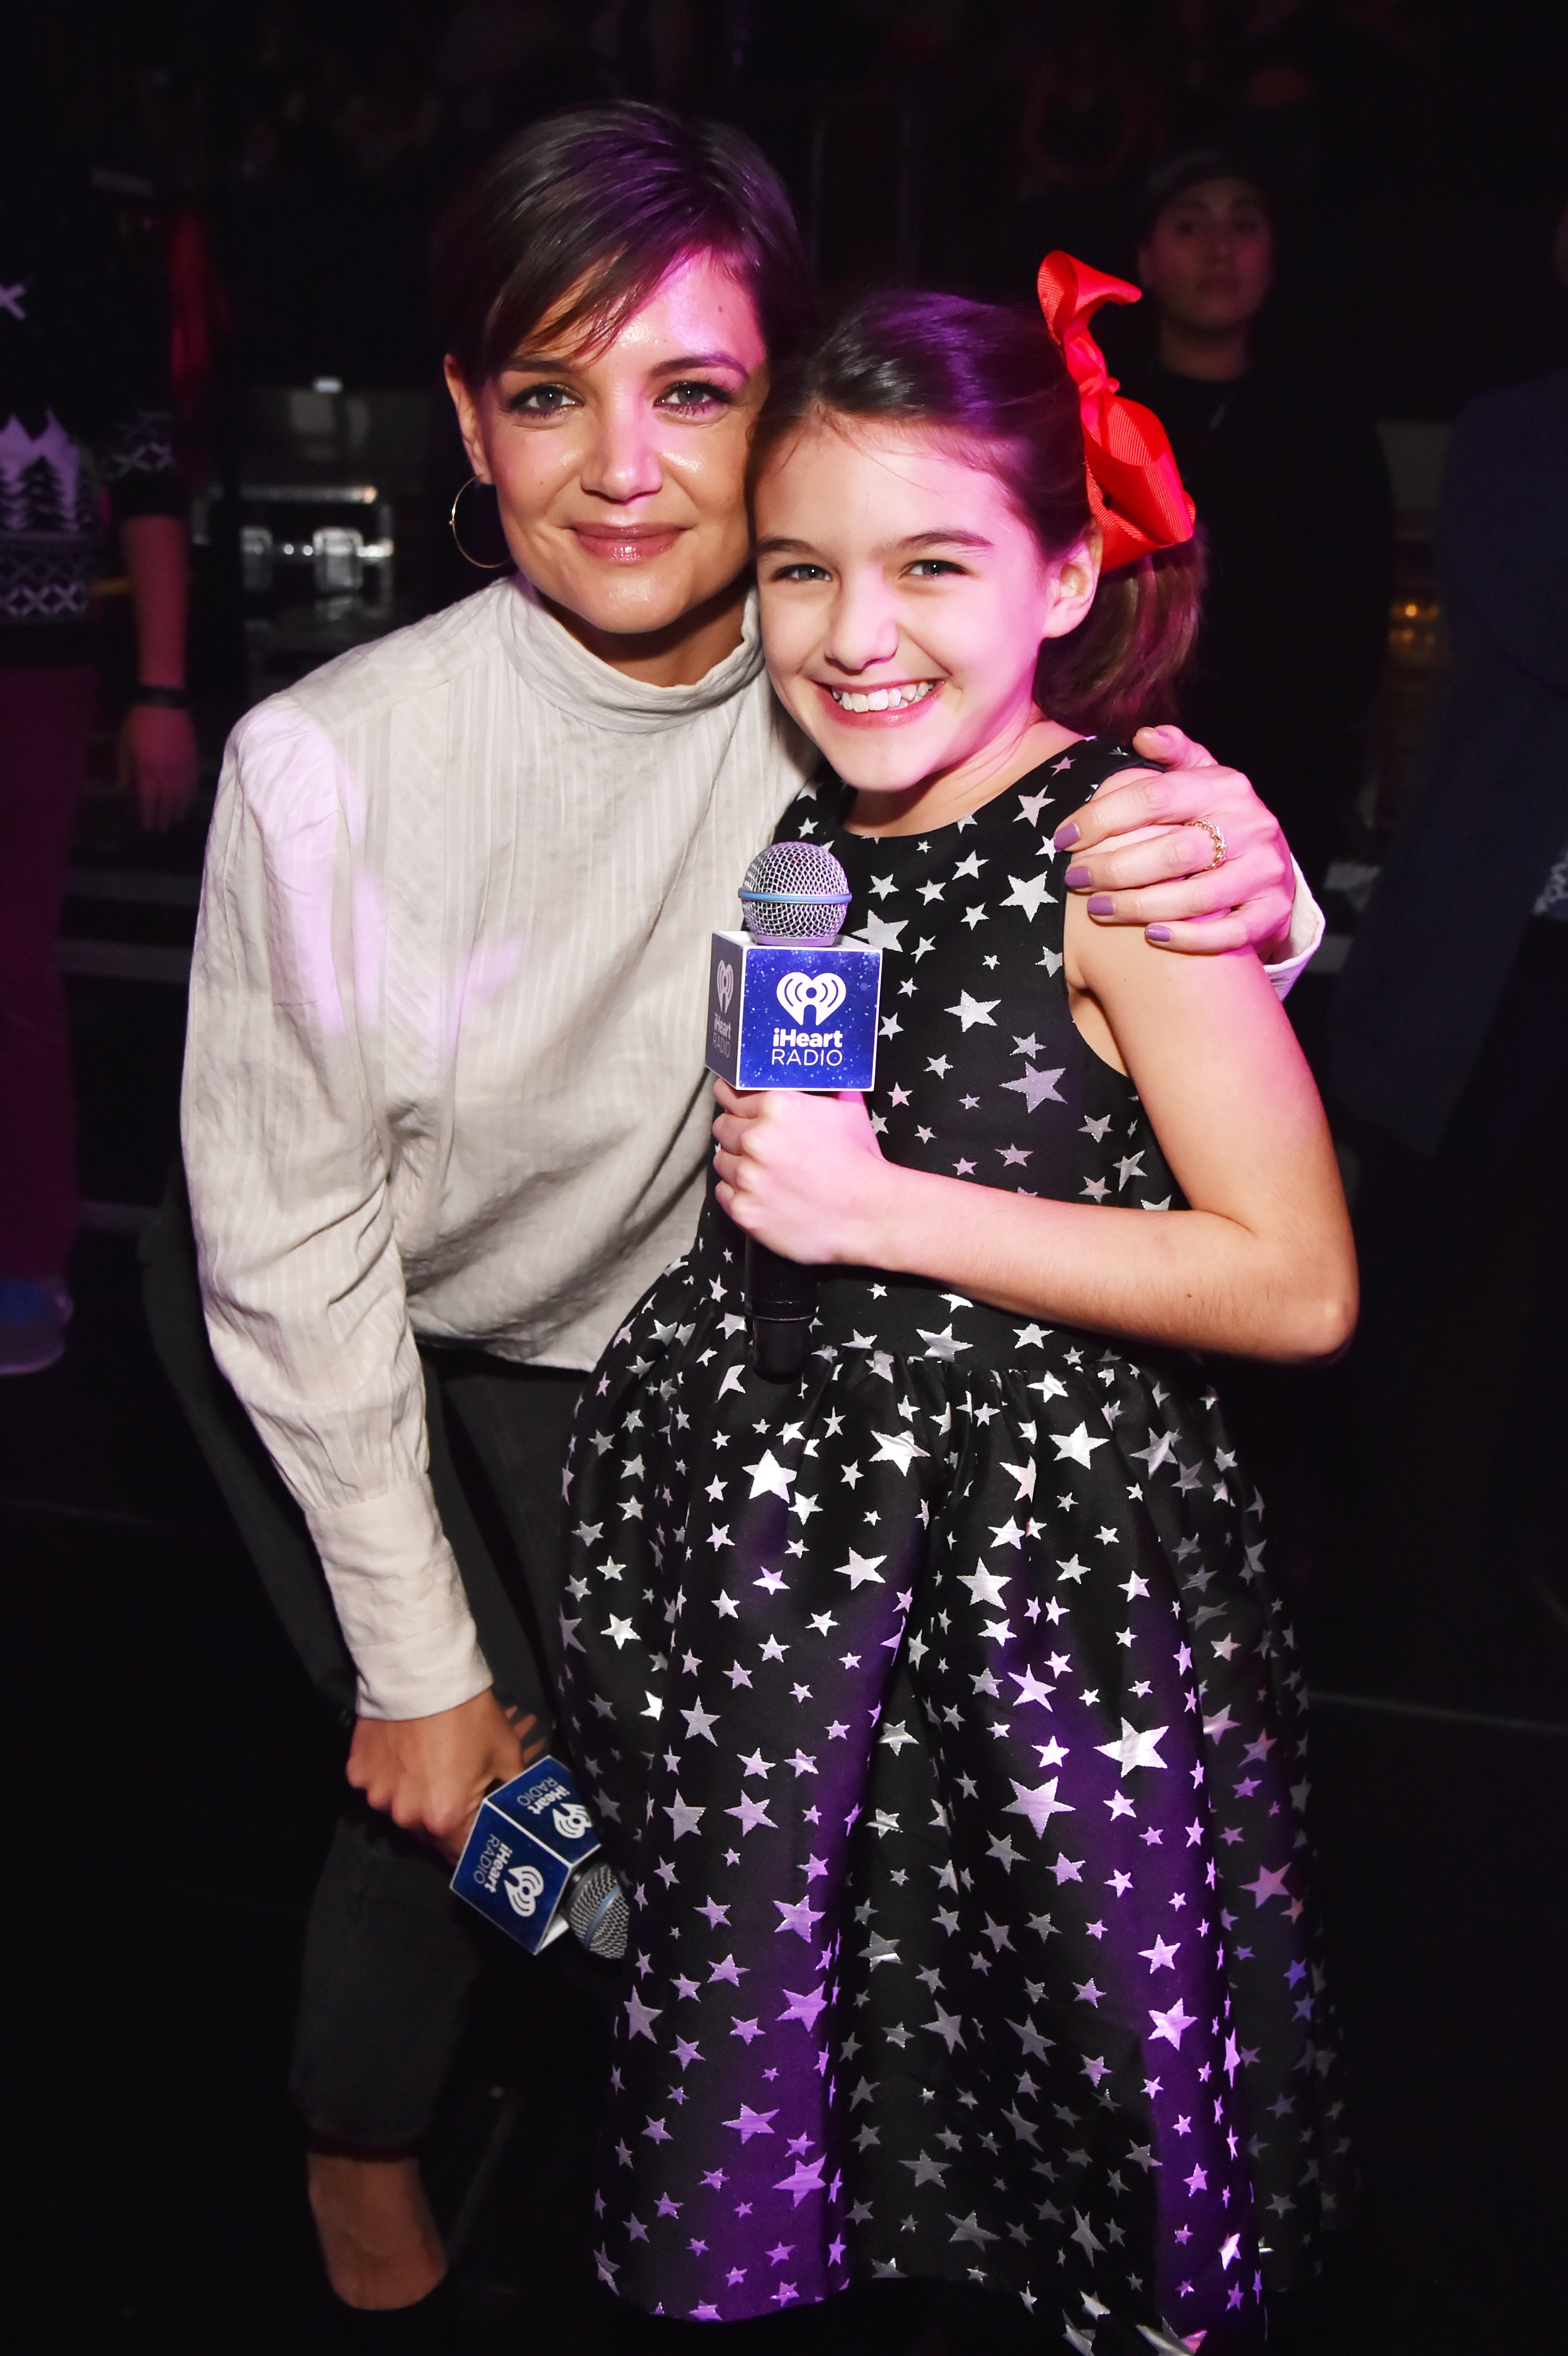 Katie Holmes and Suri Cruise attend the Z100's Jingle Ball 2017 on December 8, 2017, in New York City. | Photo: Getty Images.